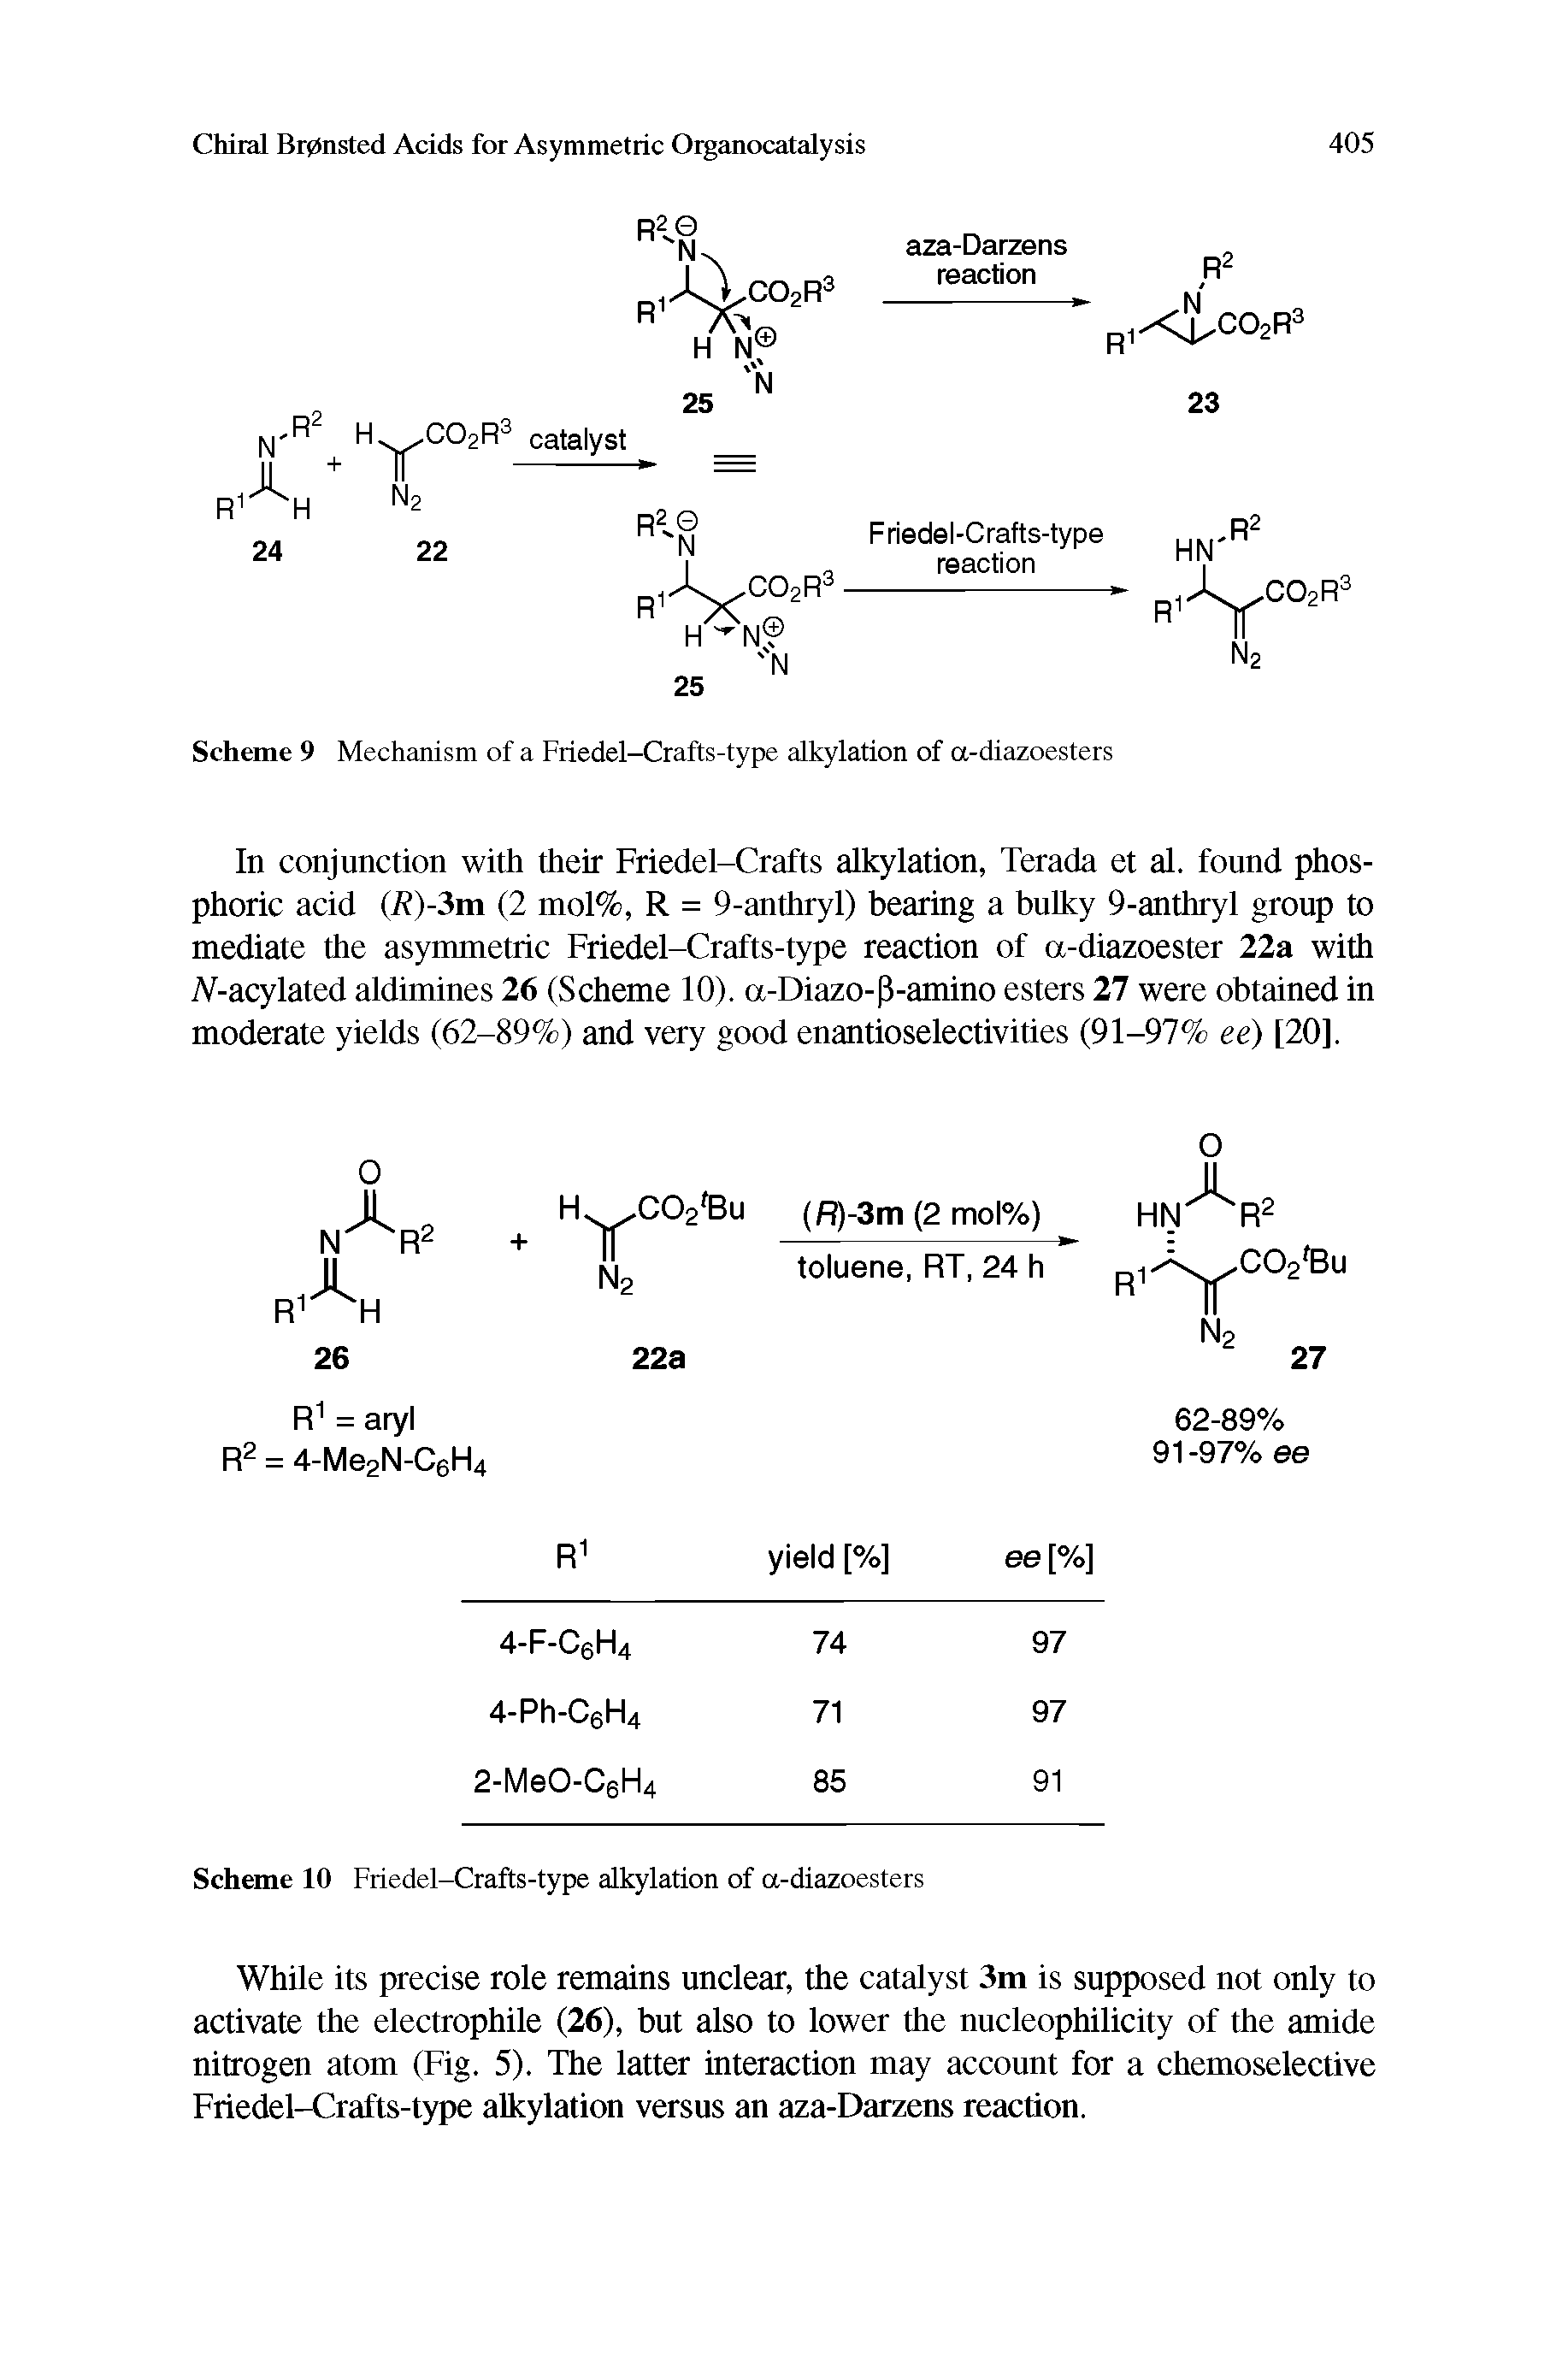 Scheme 9 Mechanism of a Friedel-Crafts-type alkylation of a-diazoesters...